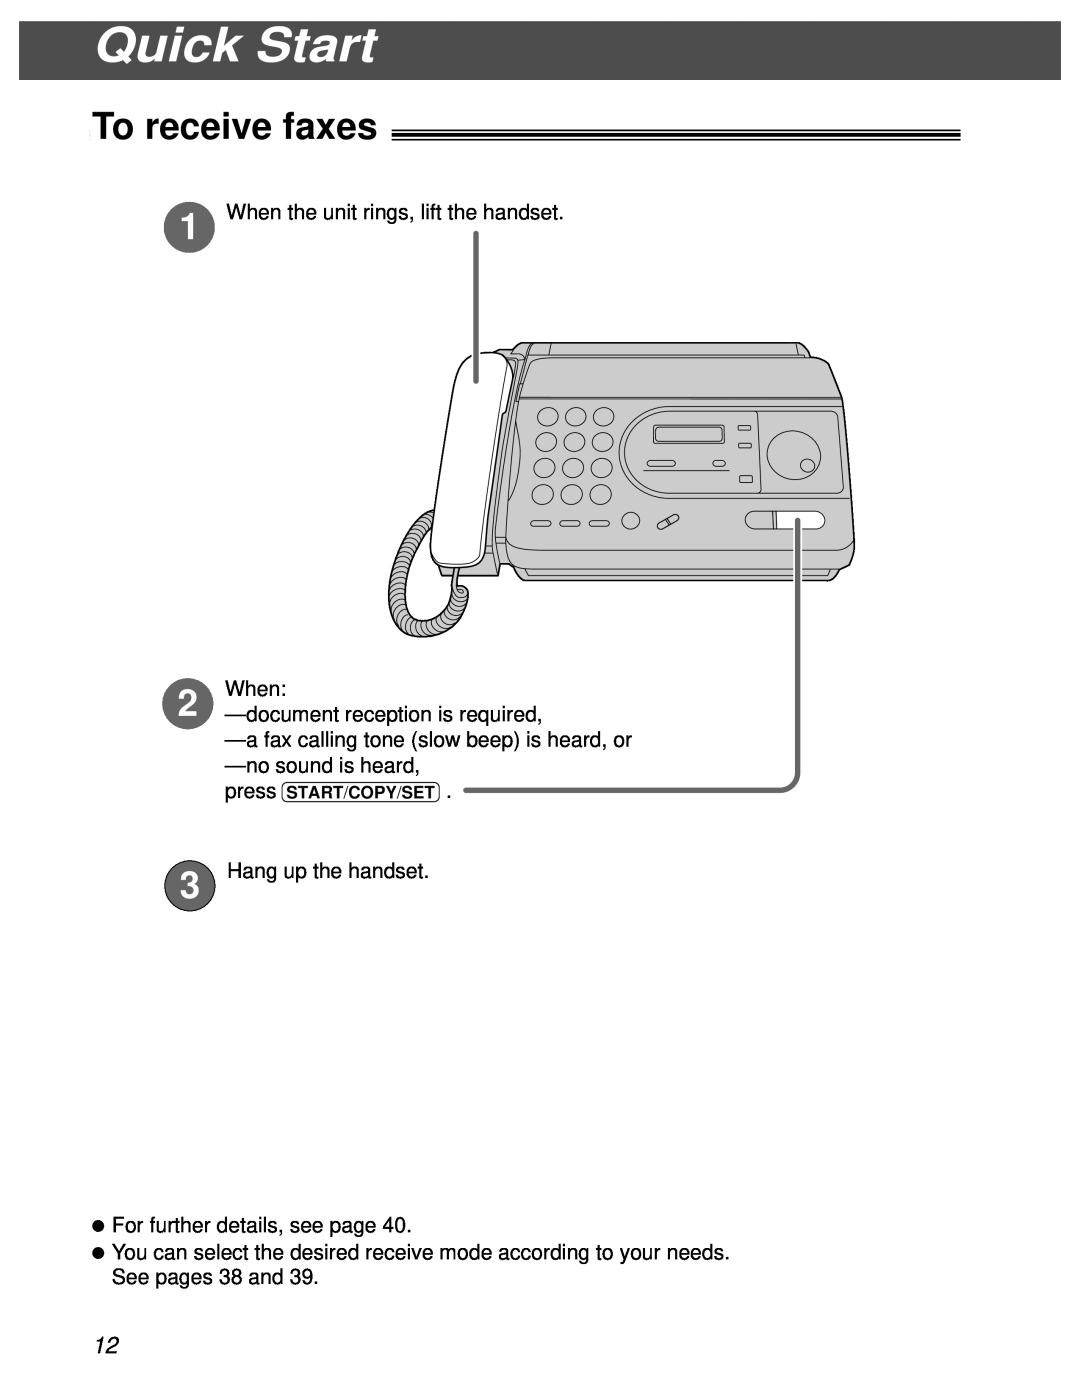 Panasonic KX-FT31BX To receive faxes, When the unit rings, lift the handset When, document reception is required 